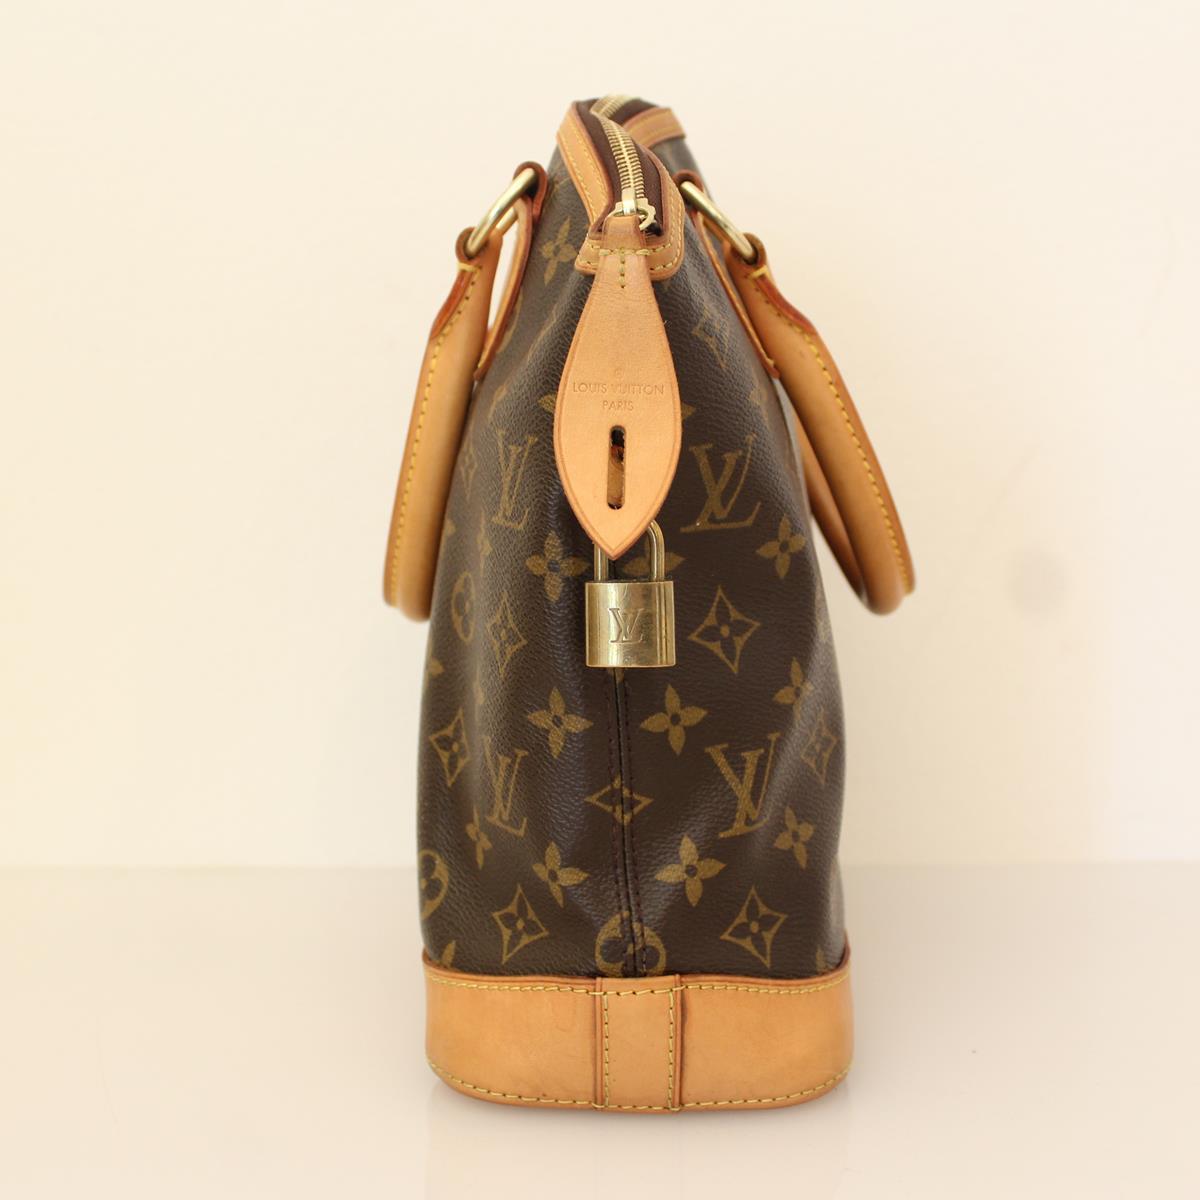 Beautiful LV bag
Year 2006
Monogram
Leather handles and inserts
Zip closure
With locker (no keys)
Internal pocket and phone holder
Cm 24 x 28 x 11  (9.44 x 11  x 4.33 inches)
Worldwide express shipping included in the price !